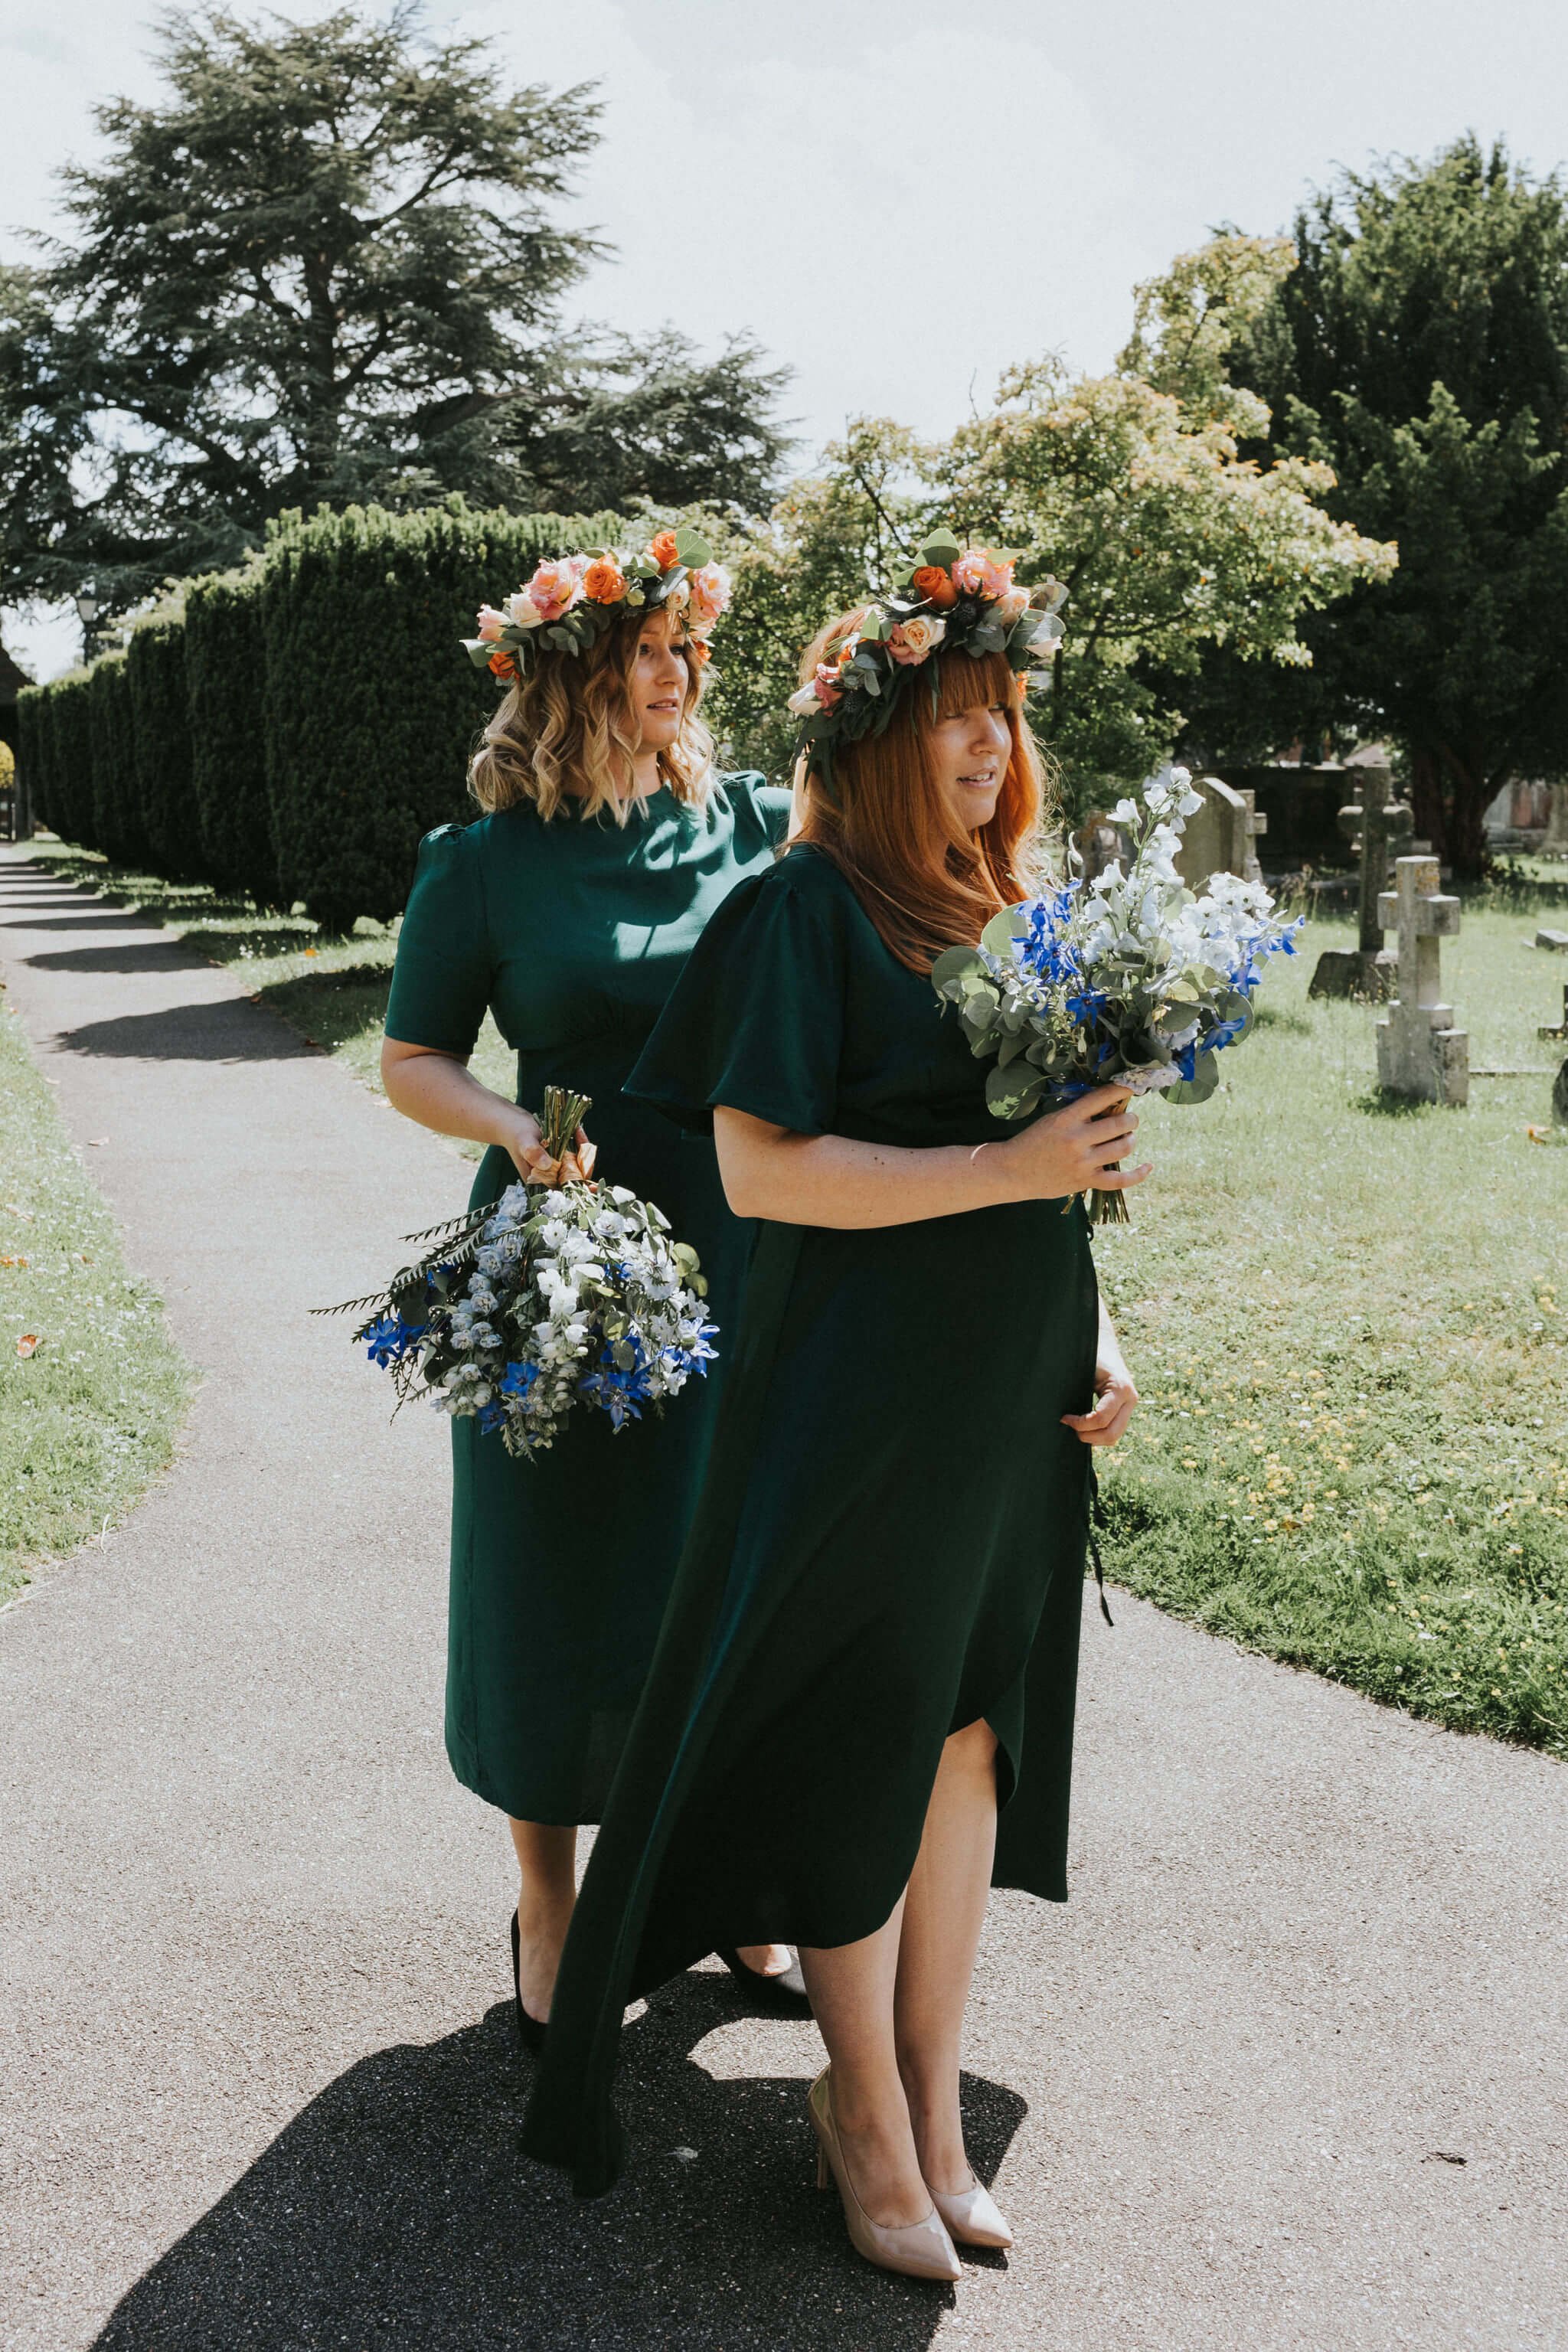 Bridesmaids-with-bouquets-and-flower-crowns.jpg